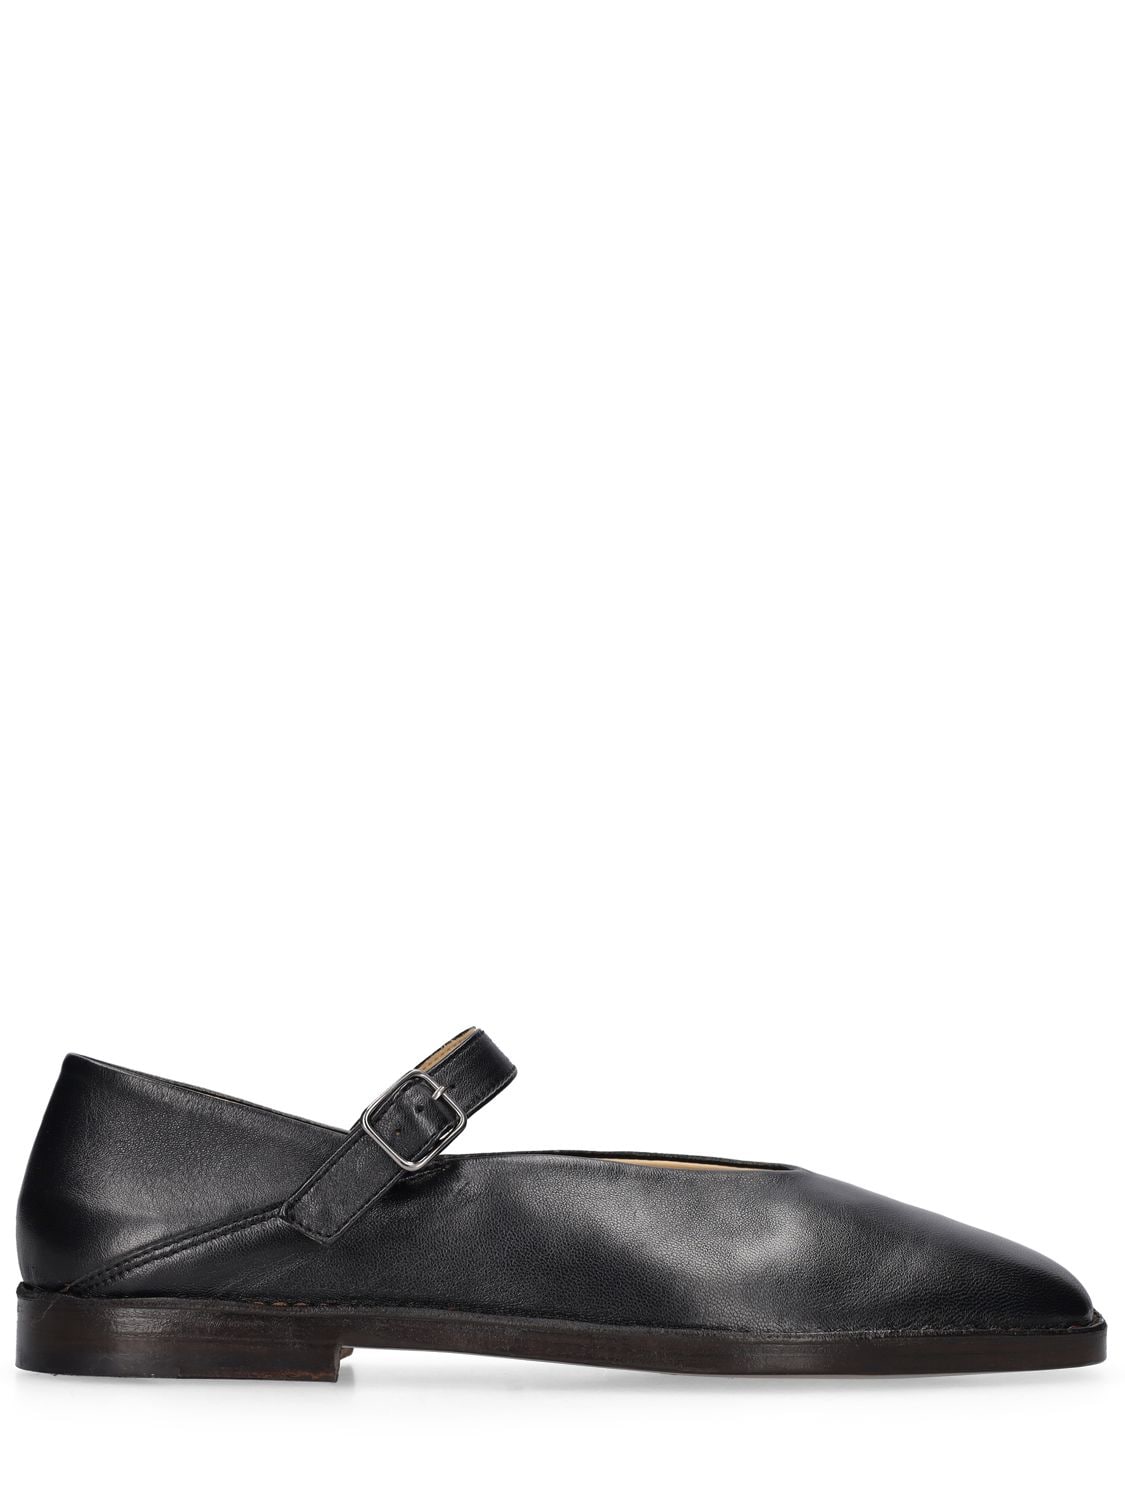 LEMAIRE LEATHER BALLERINA SHOES